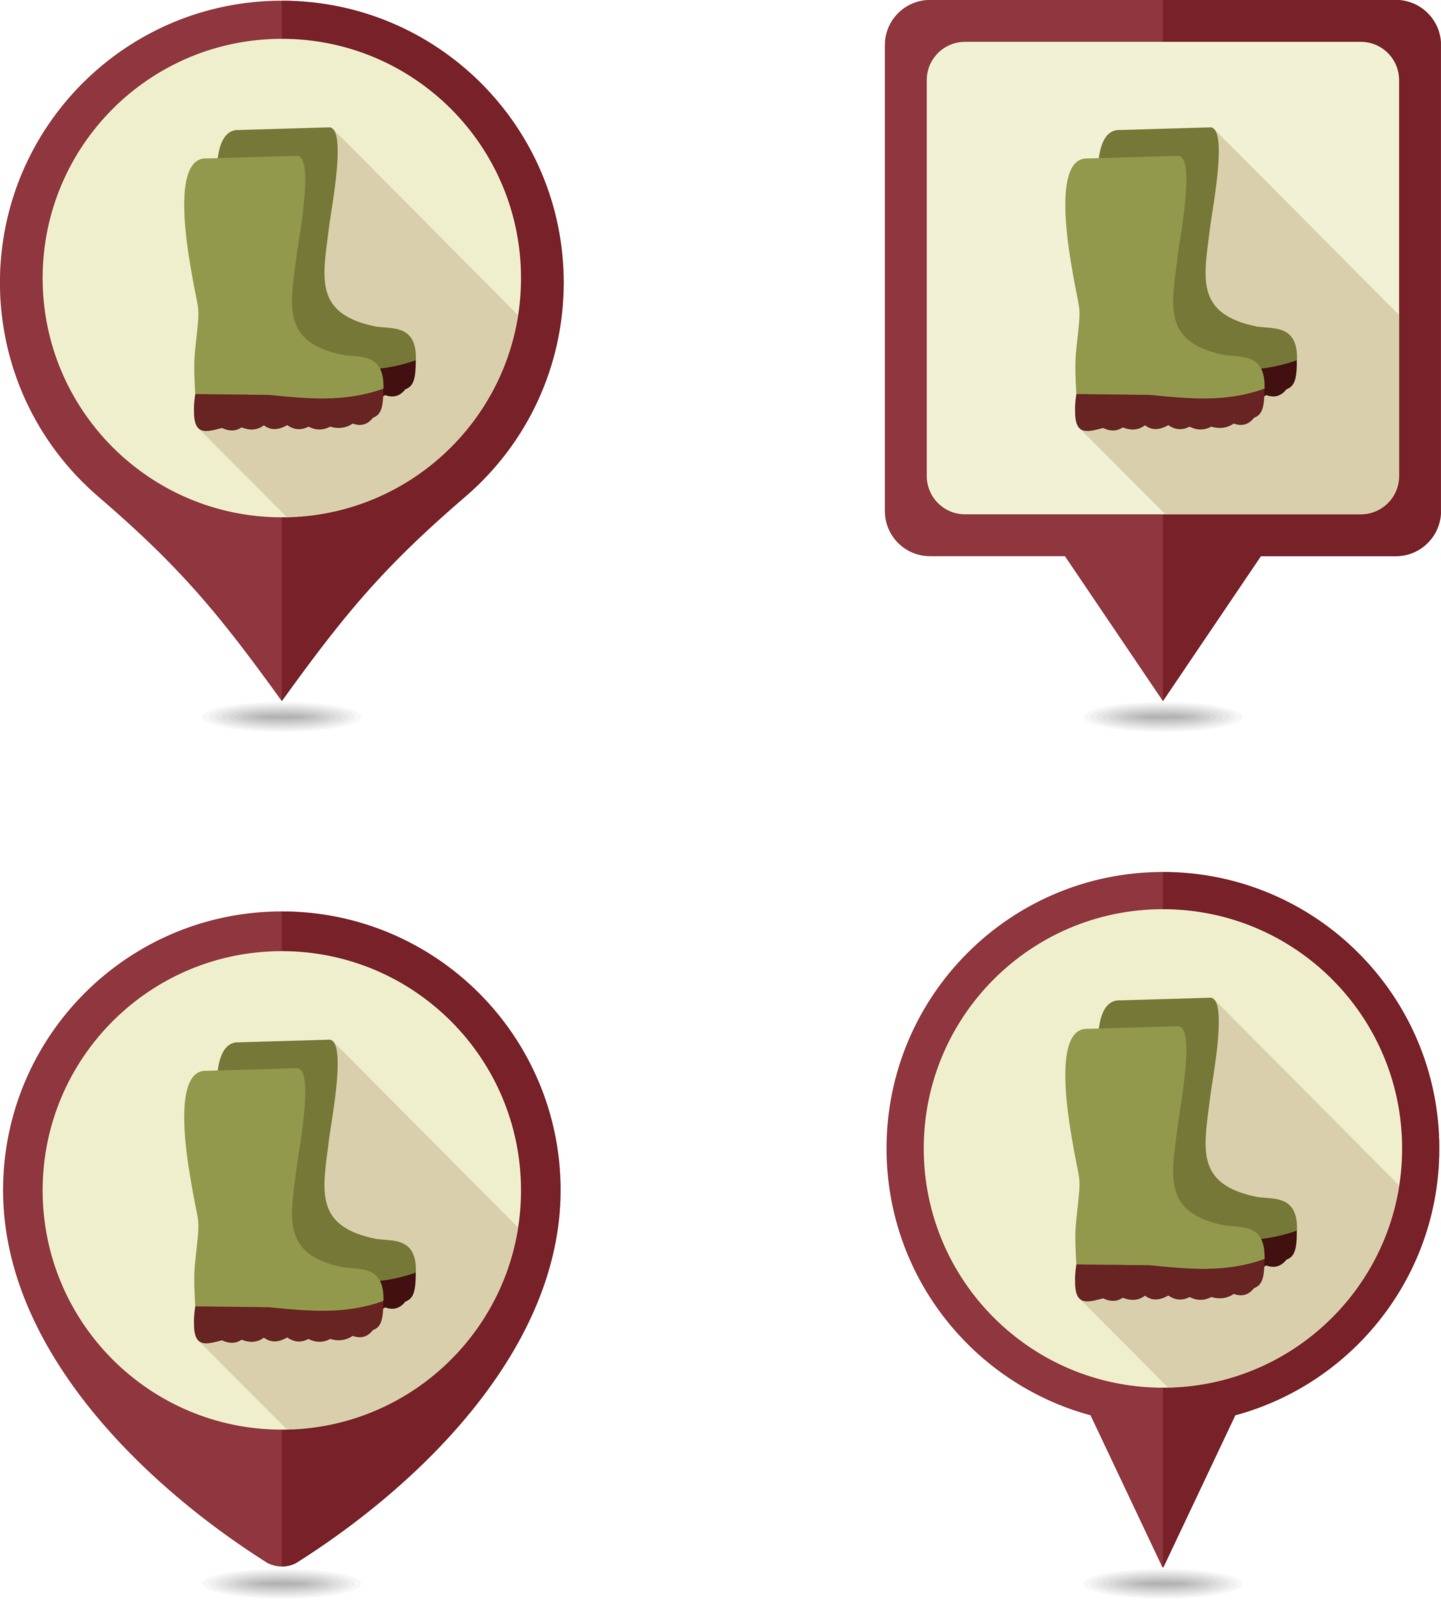 Rubber boots, gumboots, wellies pin map icon by nosik